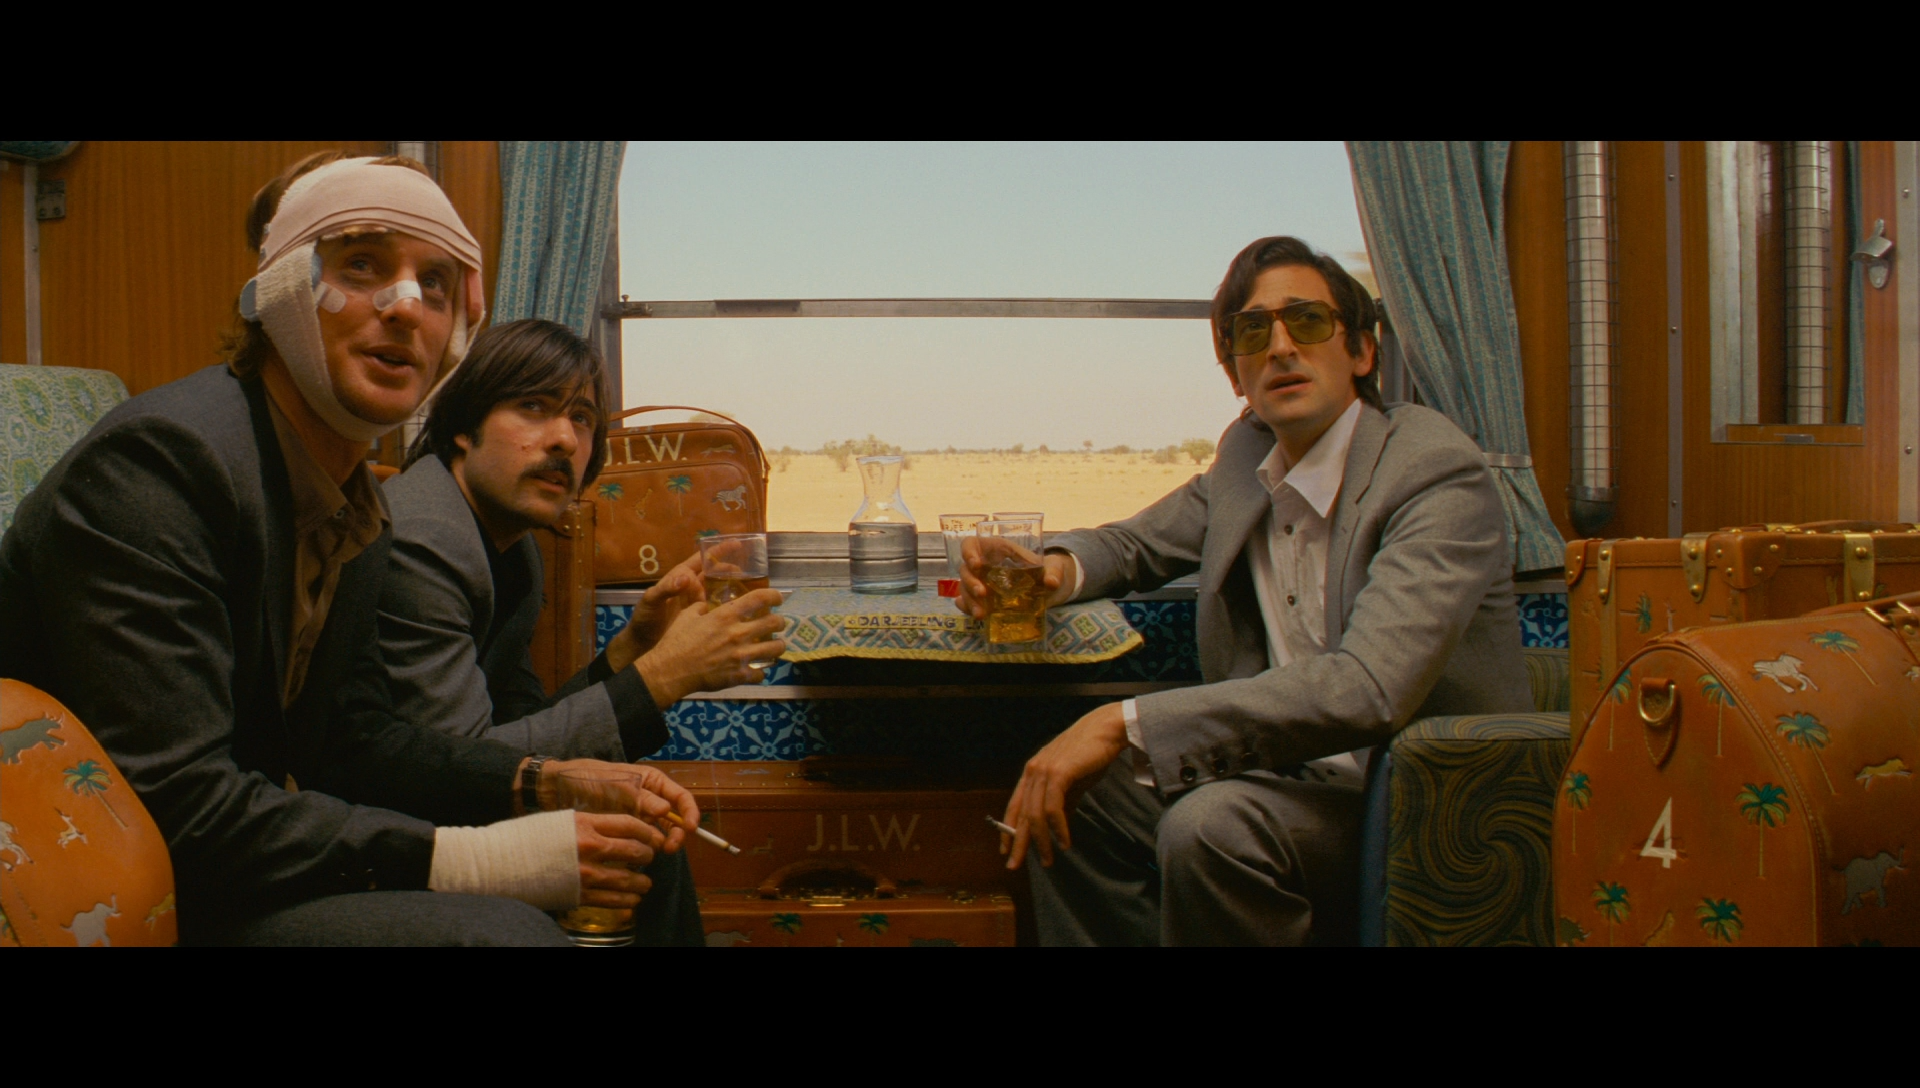 Why The Darjeeling Limited is Wes Anderson's best film